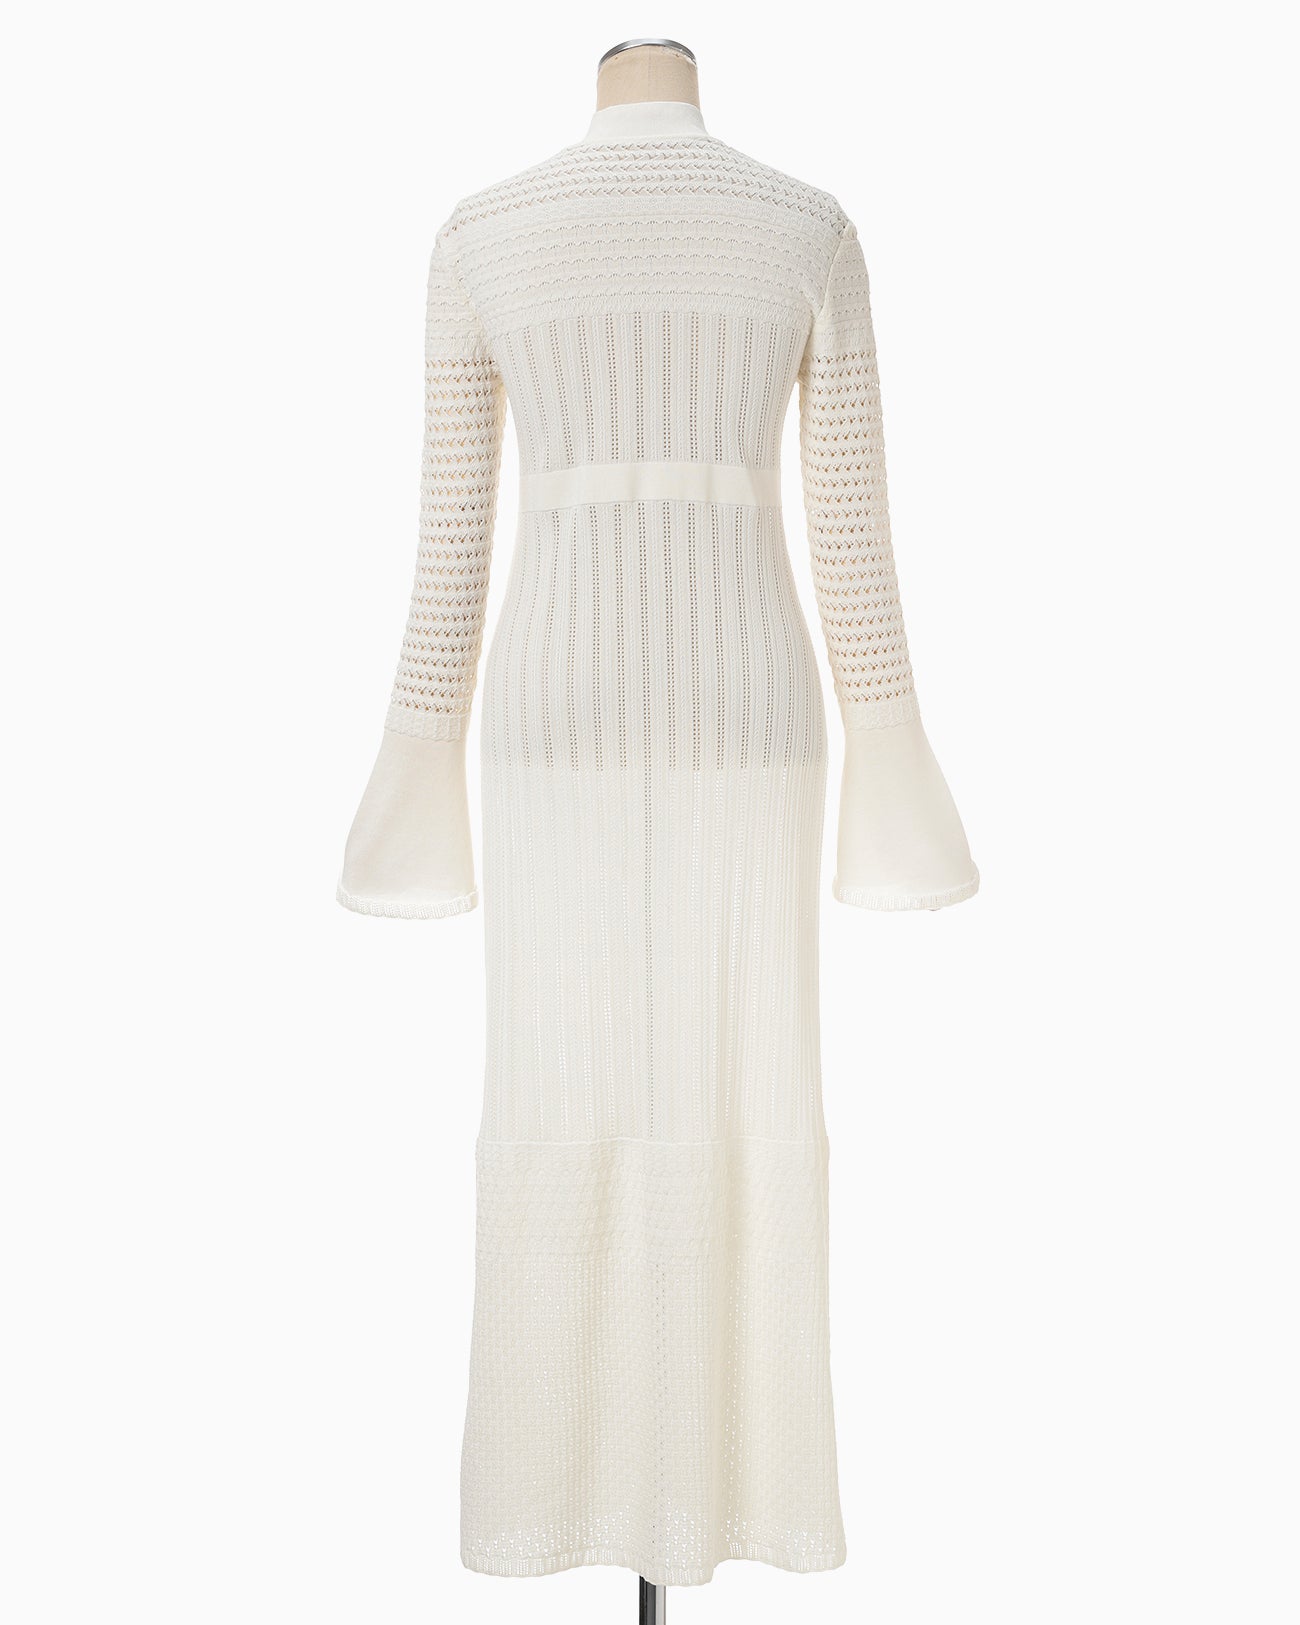 Lace Stripe Knitted Dress - white